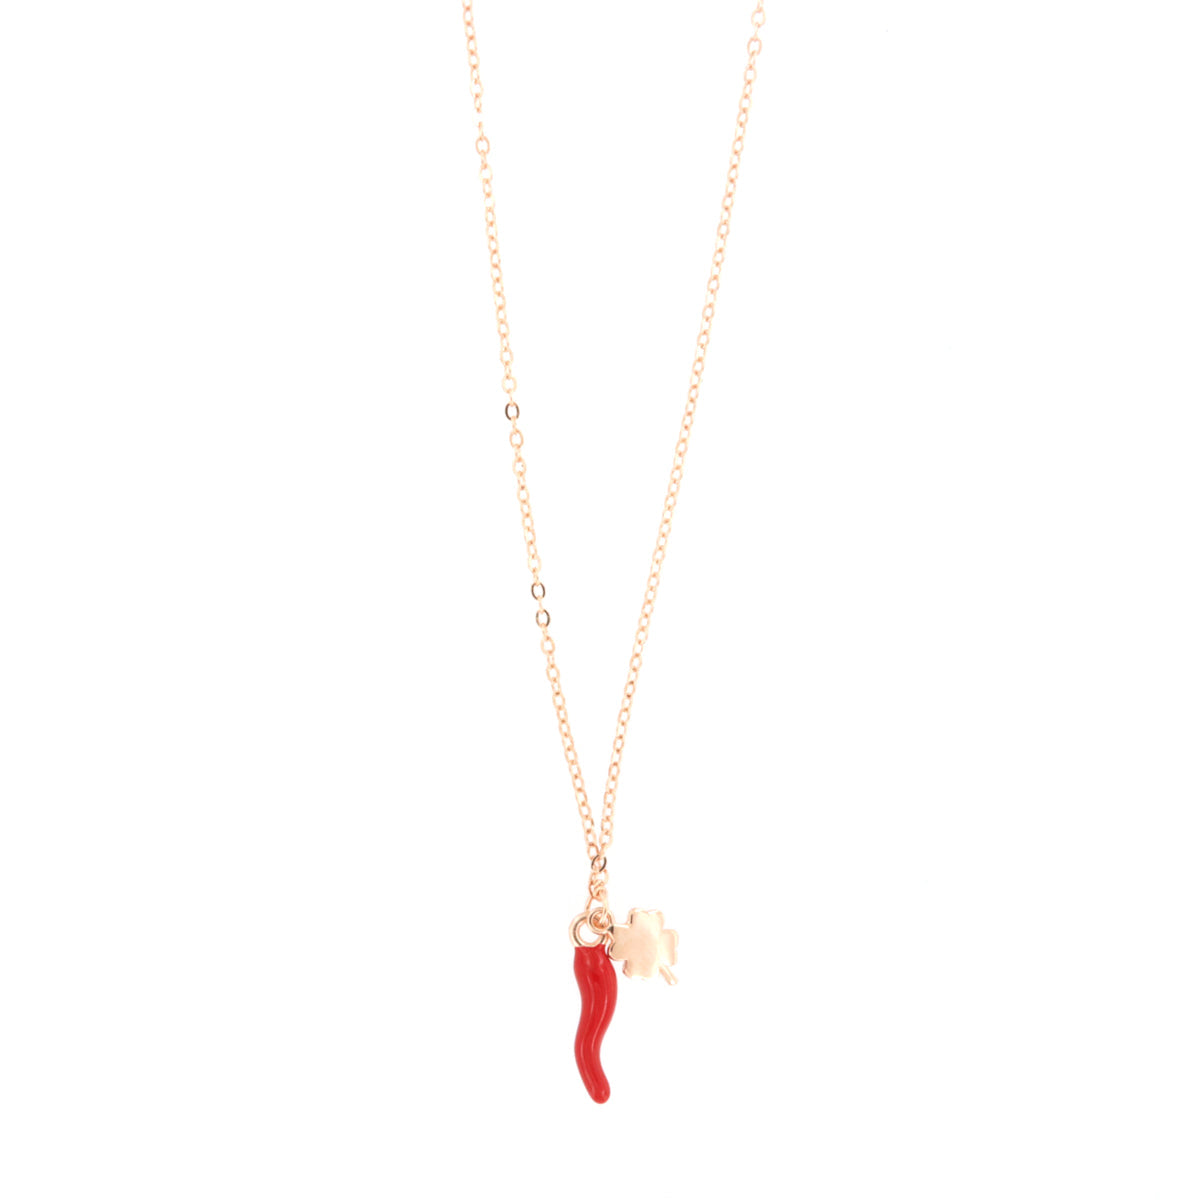 925 silver necklace with horn embellished with red enamel and four -leaf clover